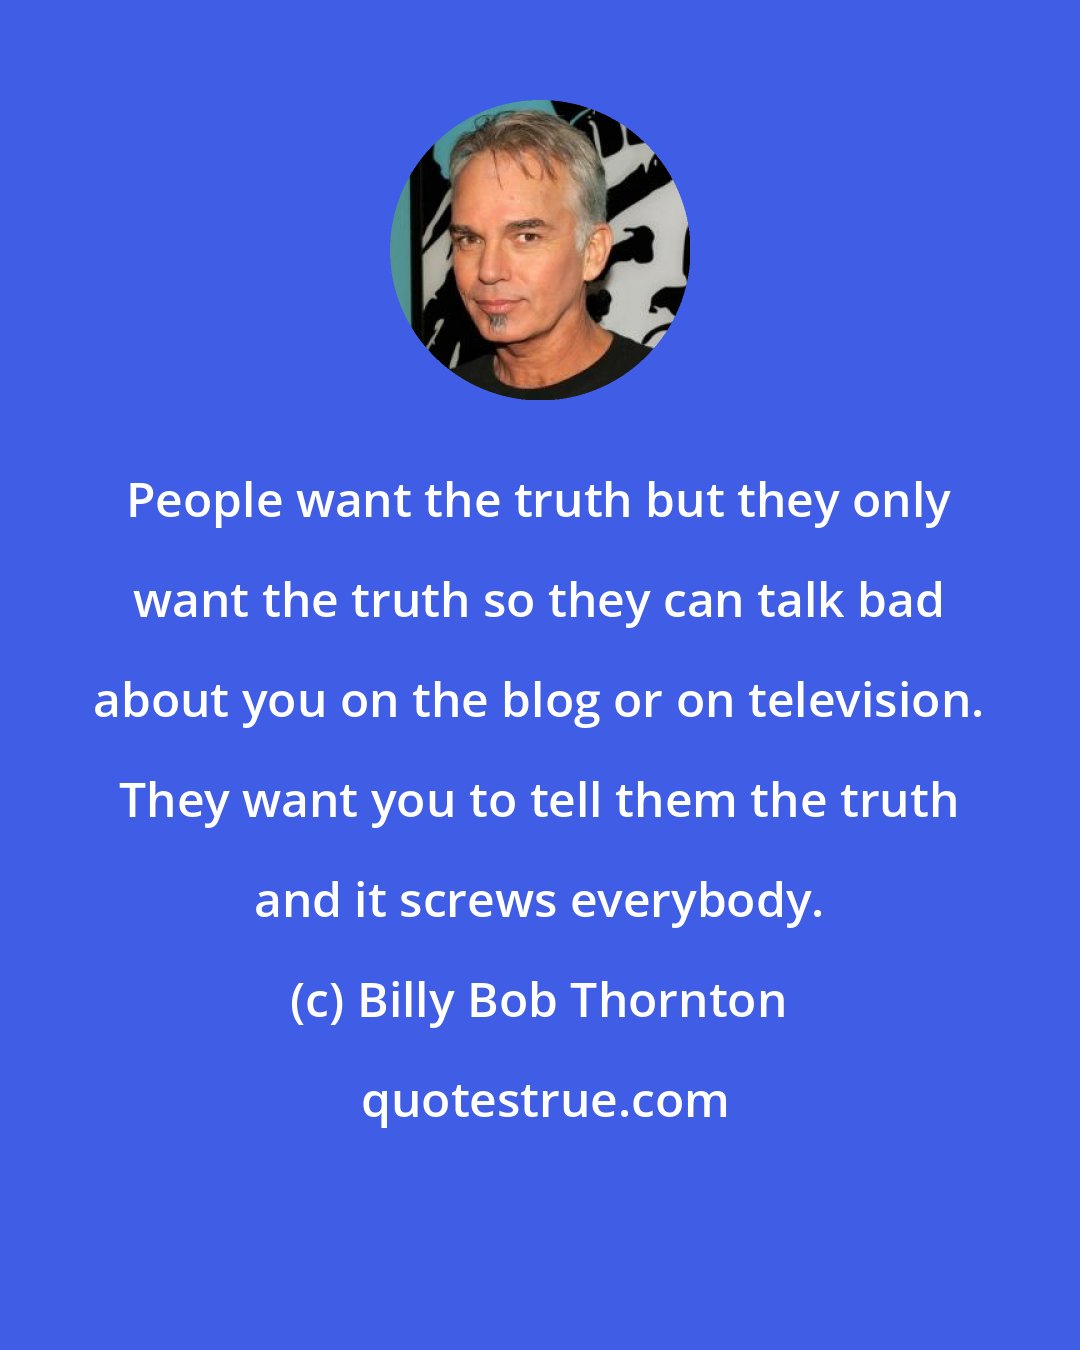 Billy Bob Thornton: People want the truth but they only want the truth so they can talk bad about you on the blog or on television. They want you to tell them the truth and it screws everybody.